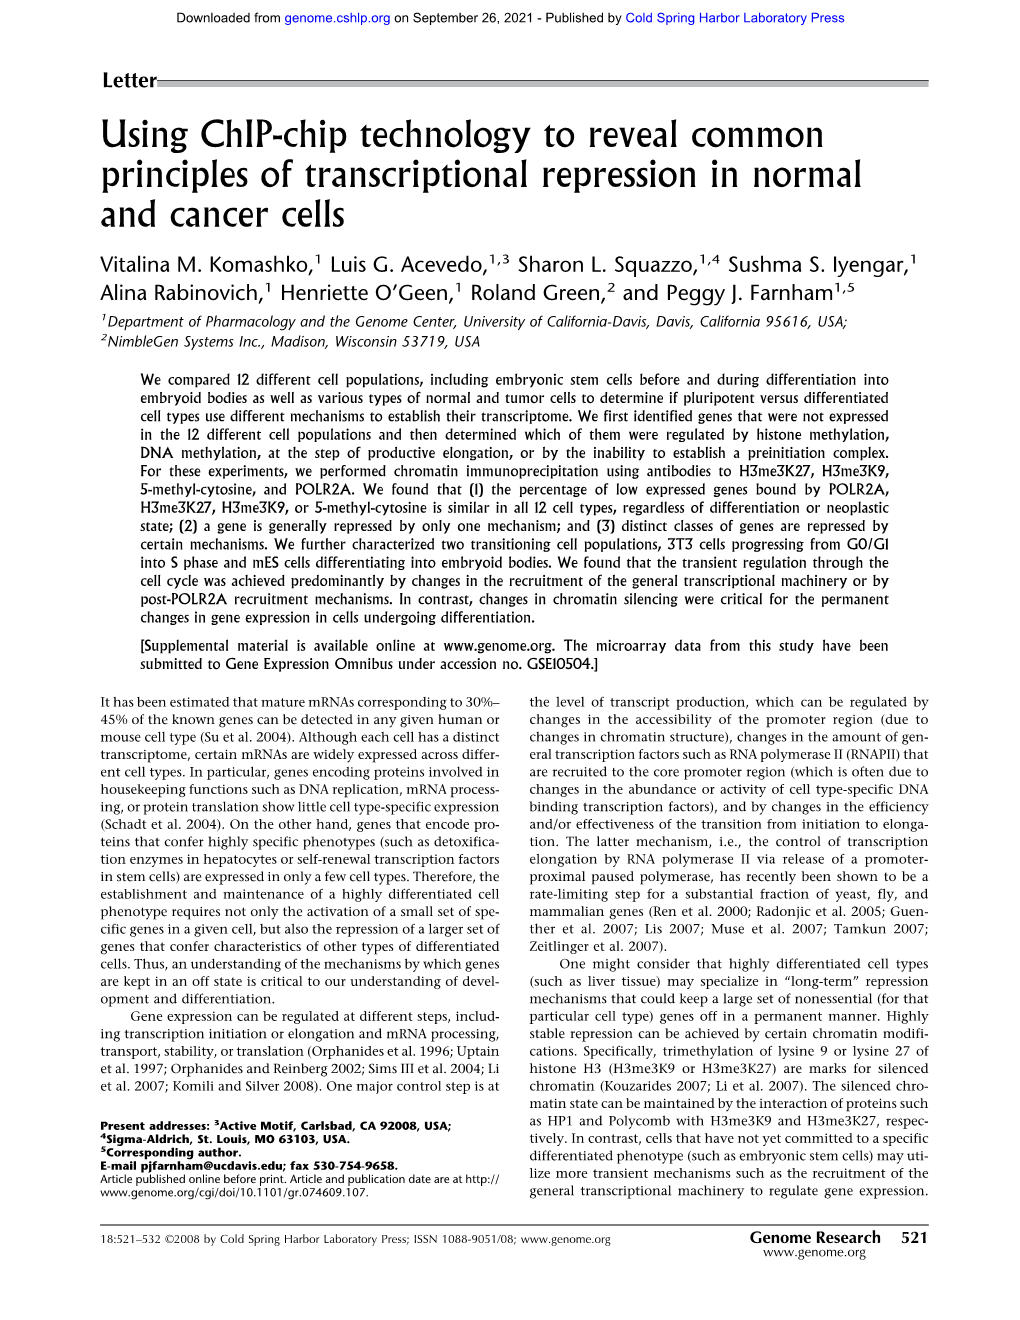 Using Chip-Chip Technology to Reveal Common Principles of Transcriptional Repression in Normal and Cancer Cells